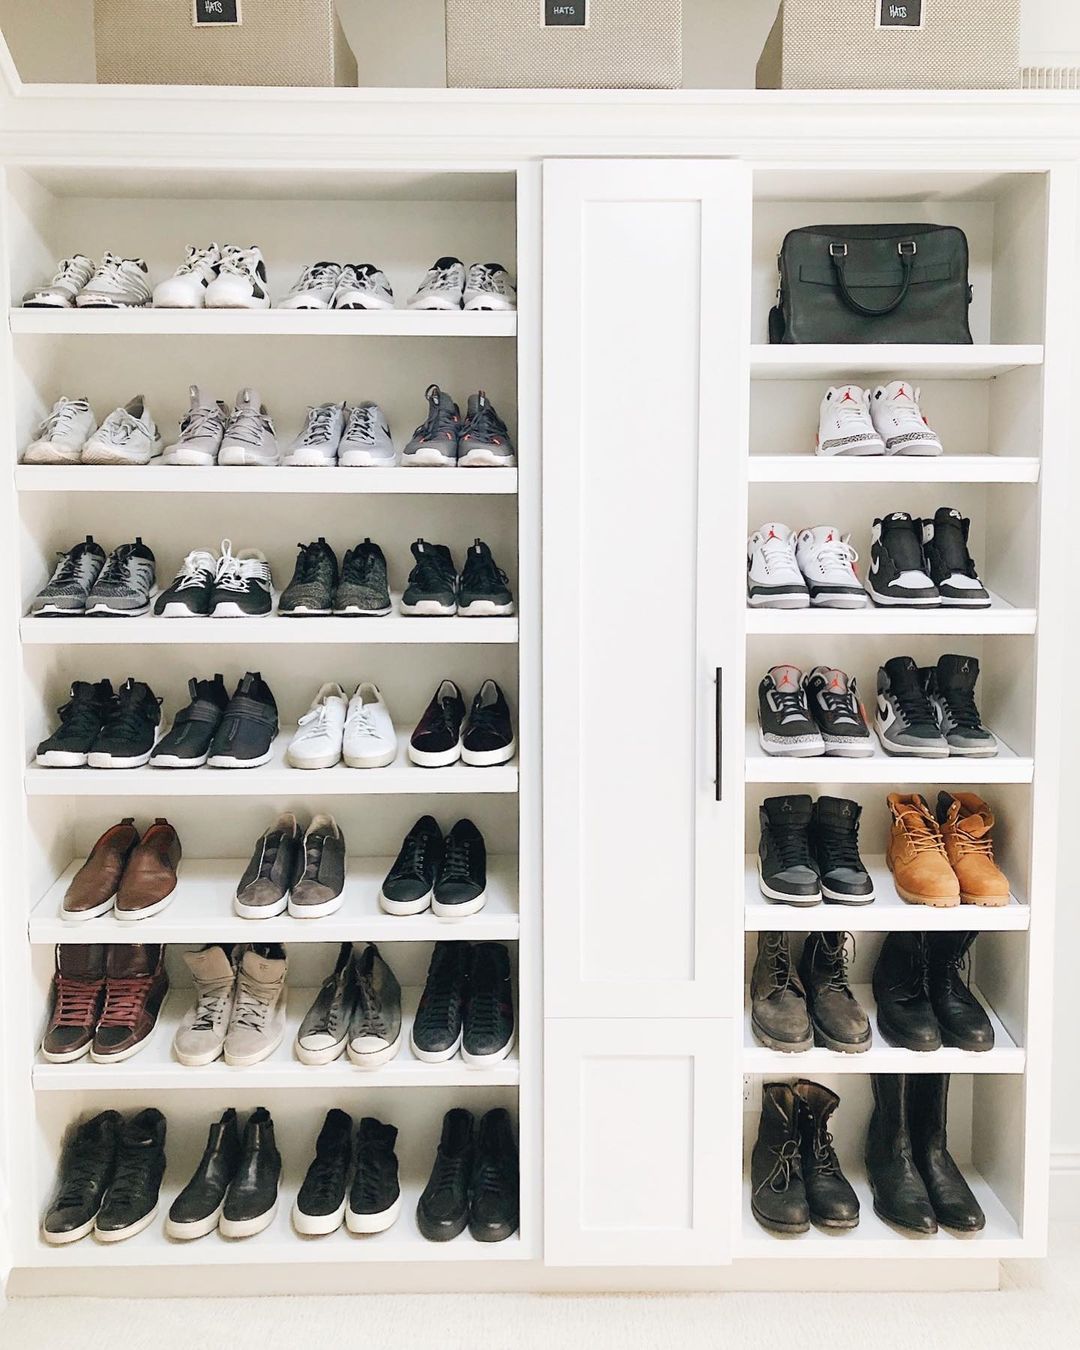 Shoes stored on open shelves in a closet.